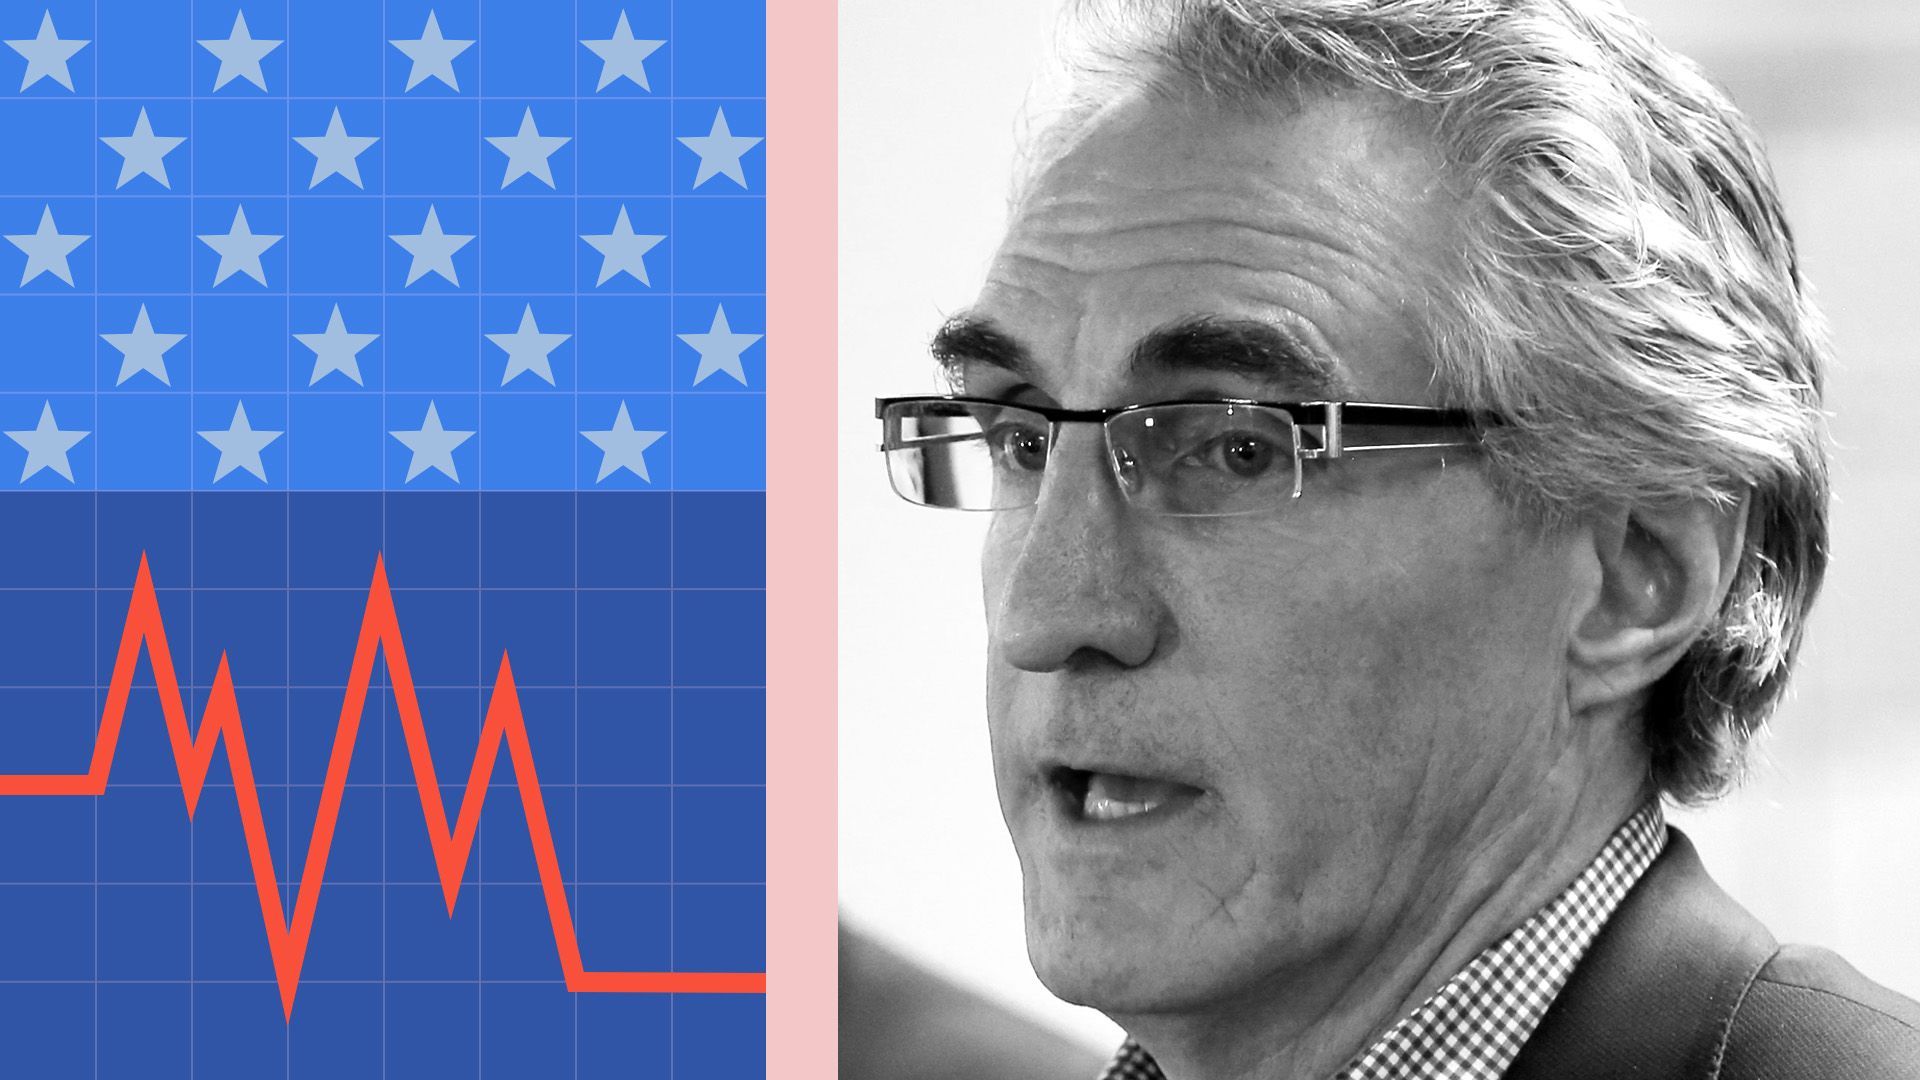 Photo illustration of North Dakota Governor Doug Burgum next to various shapes include a pattern of stars, a grid, and a red line mimicking a stock line